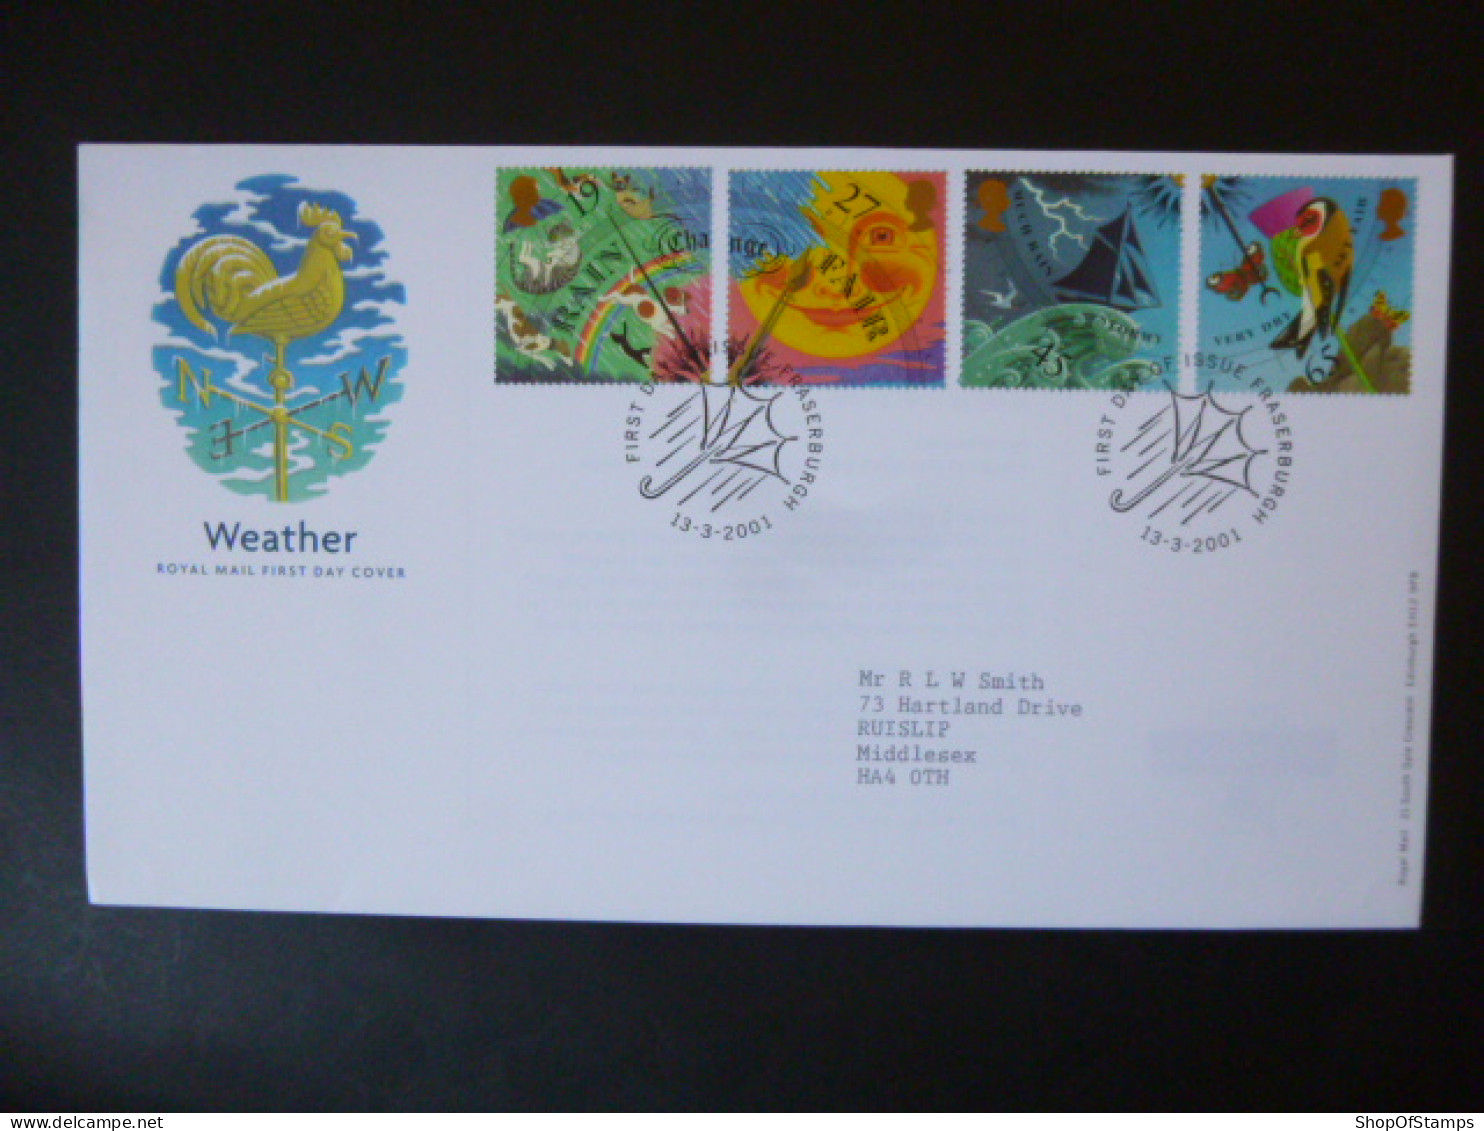 GREAT BRITAIN SG 2197-2200 THE WEATHER FDC FRASERBURGH - Unclassified